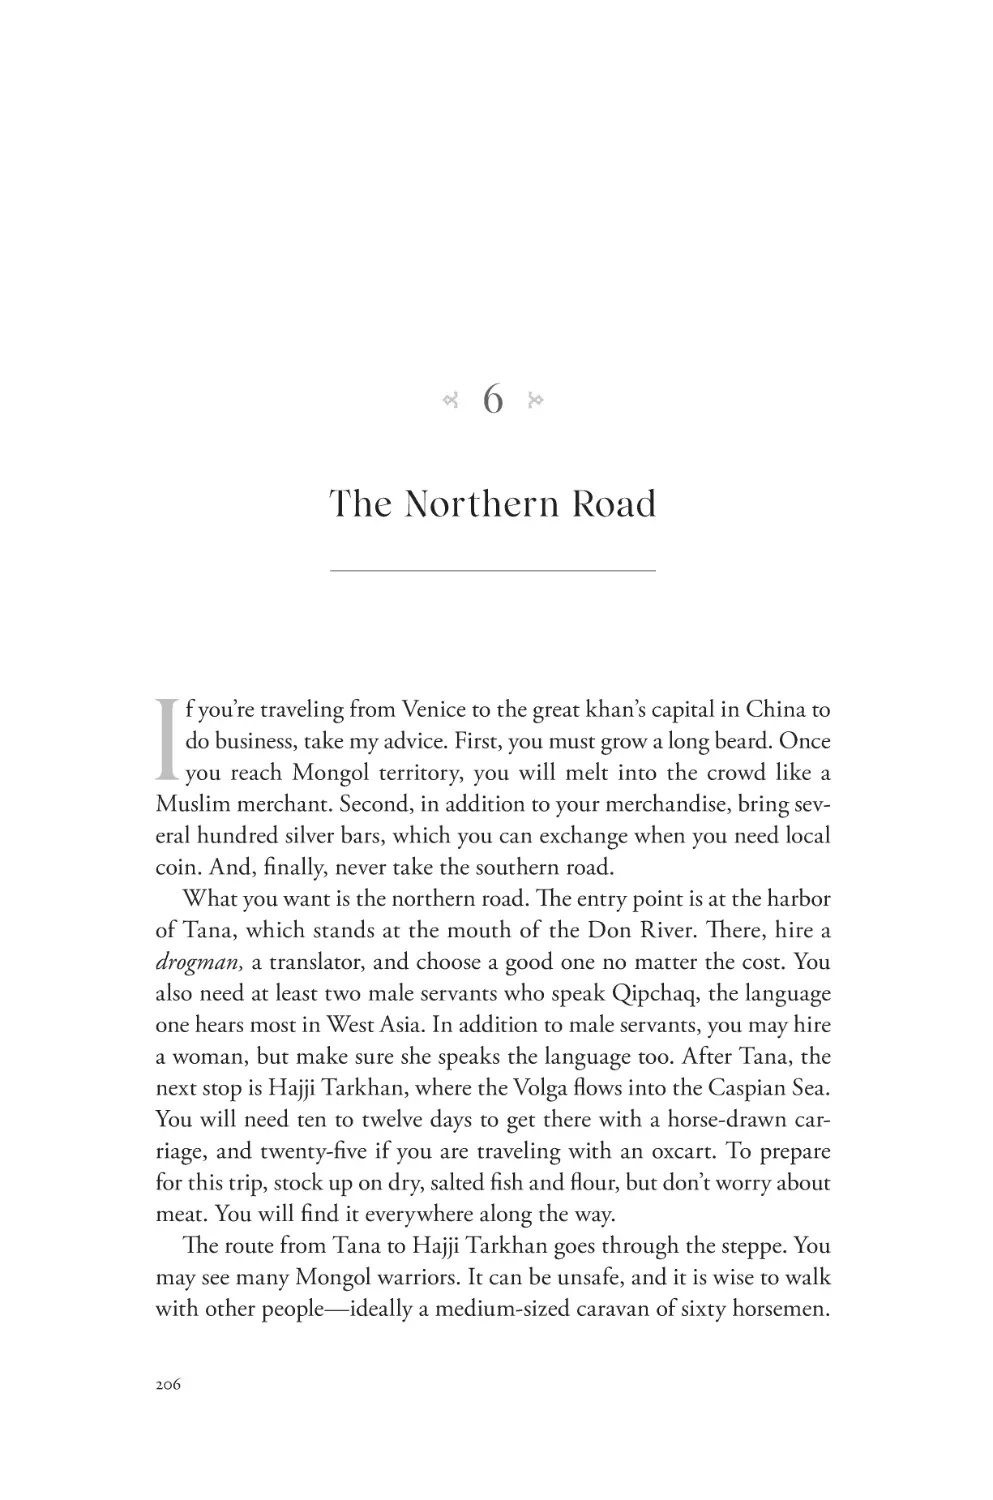 6. The Northern Road